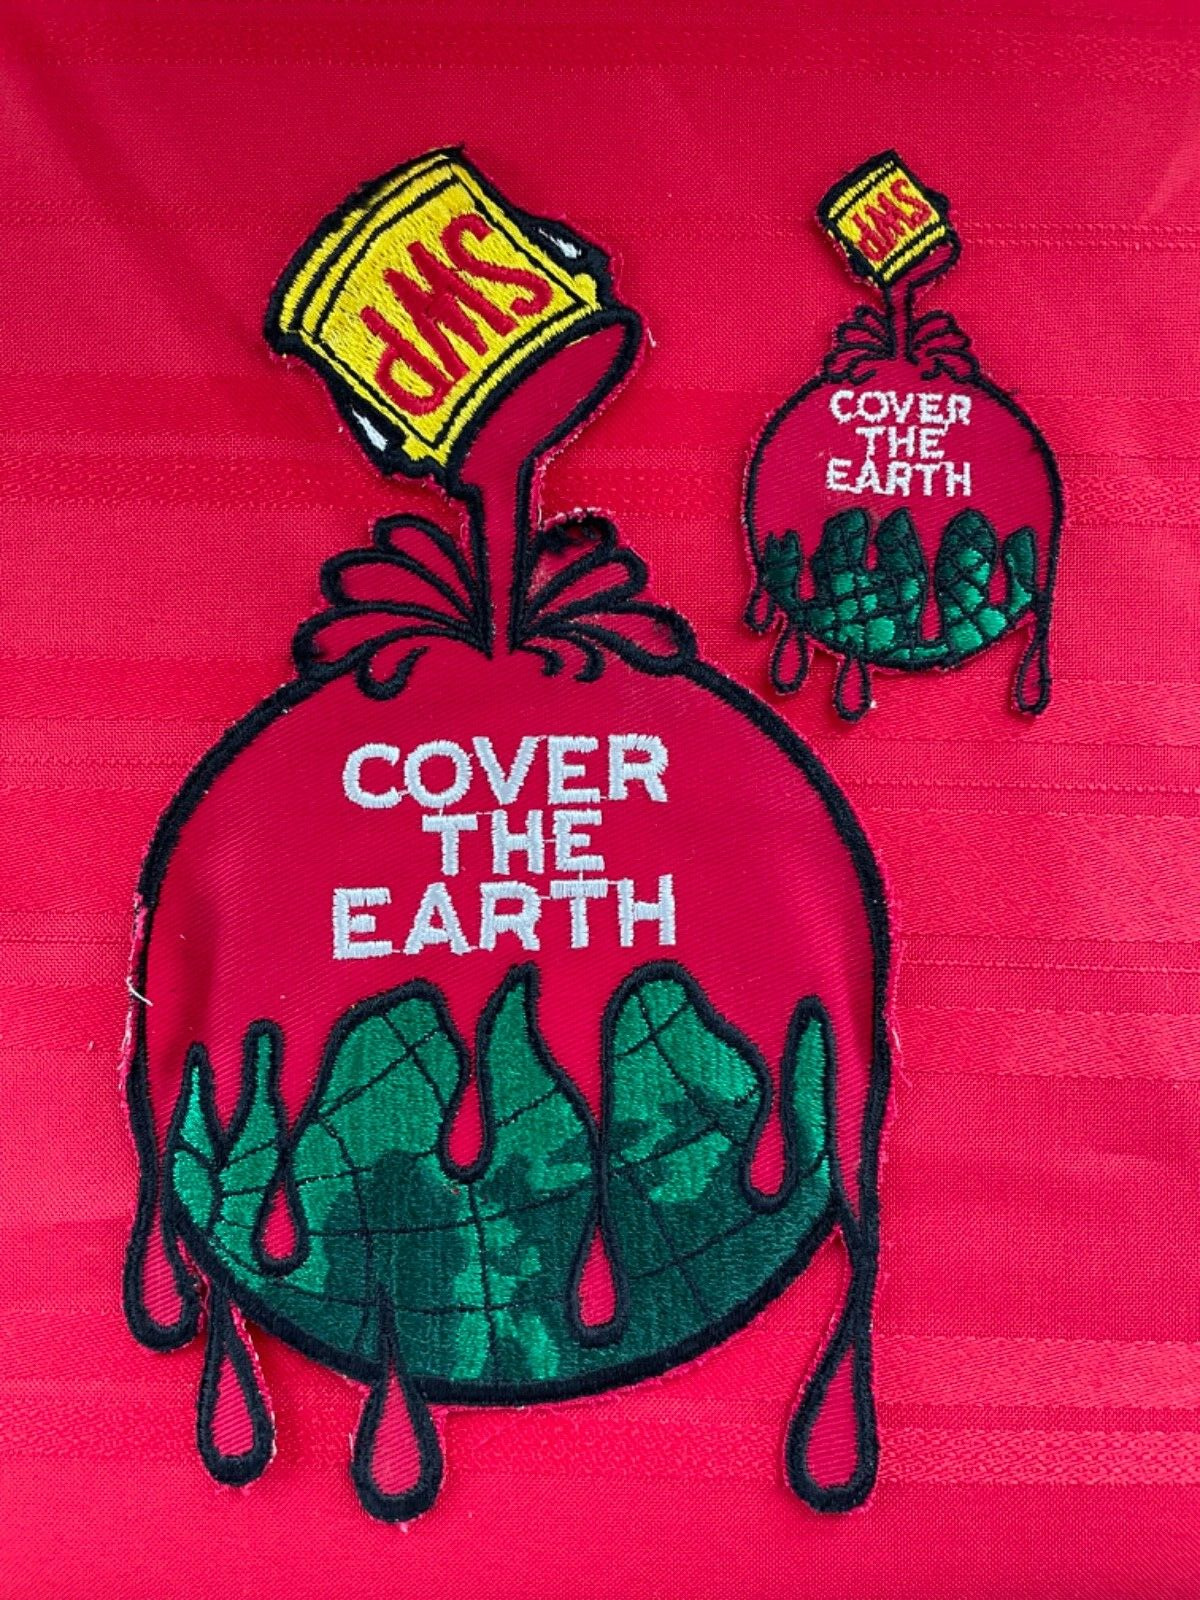 2 Original Vintage Sherwin Williams Paint Embroidered Patches RARE Advertisement